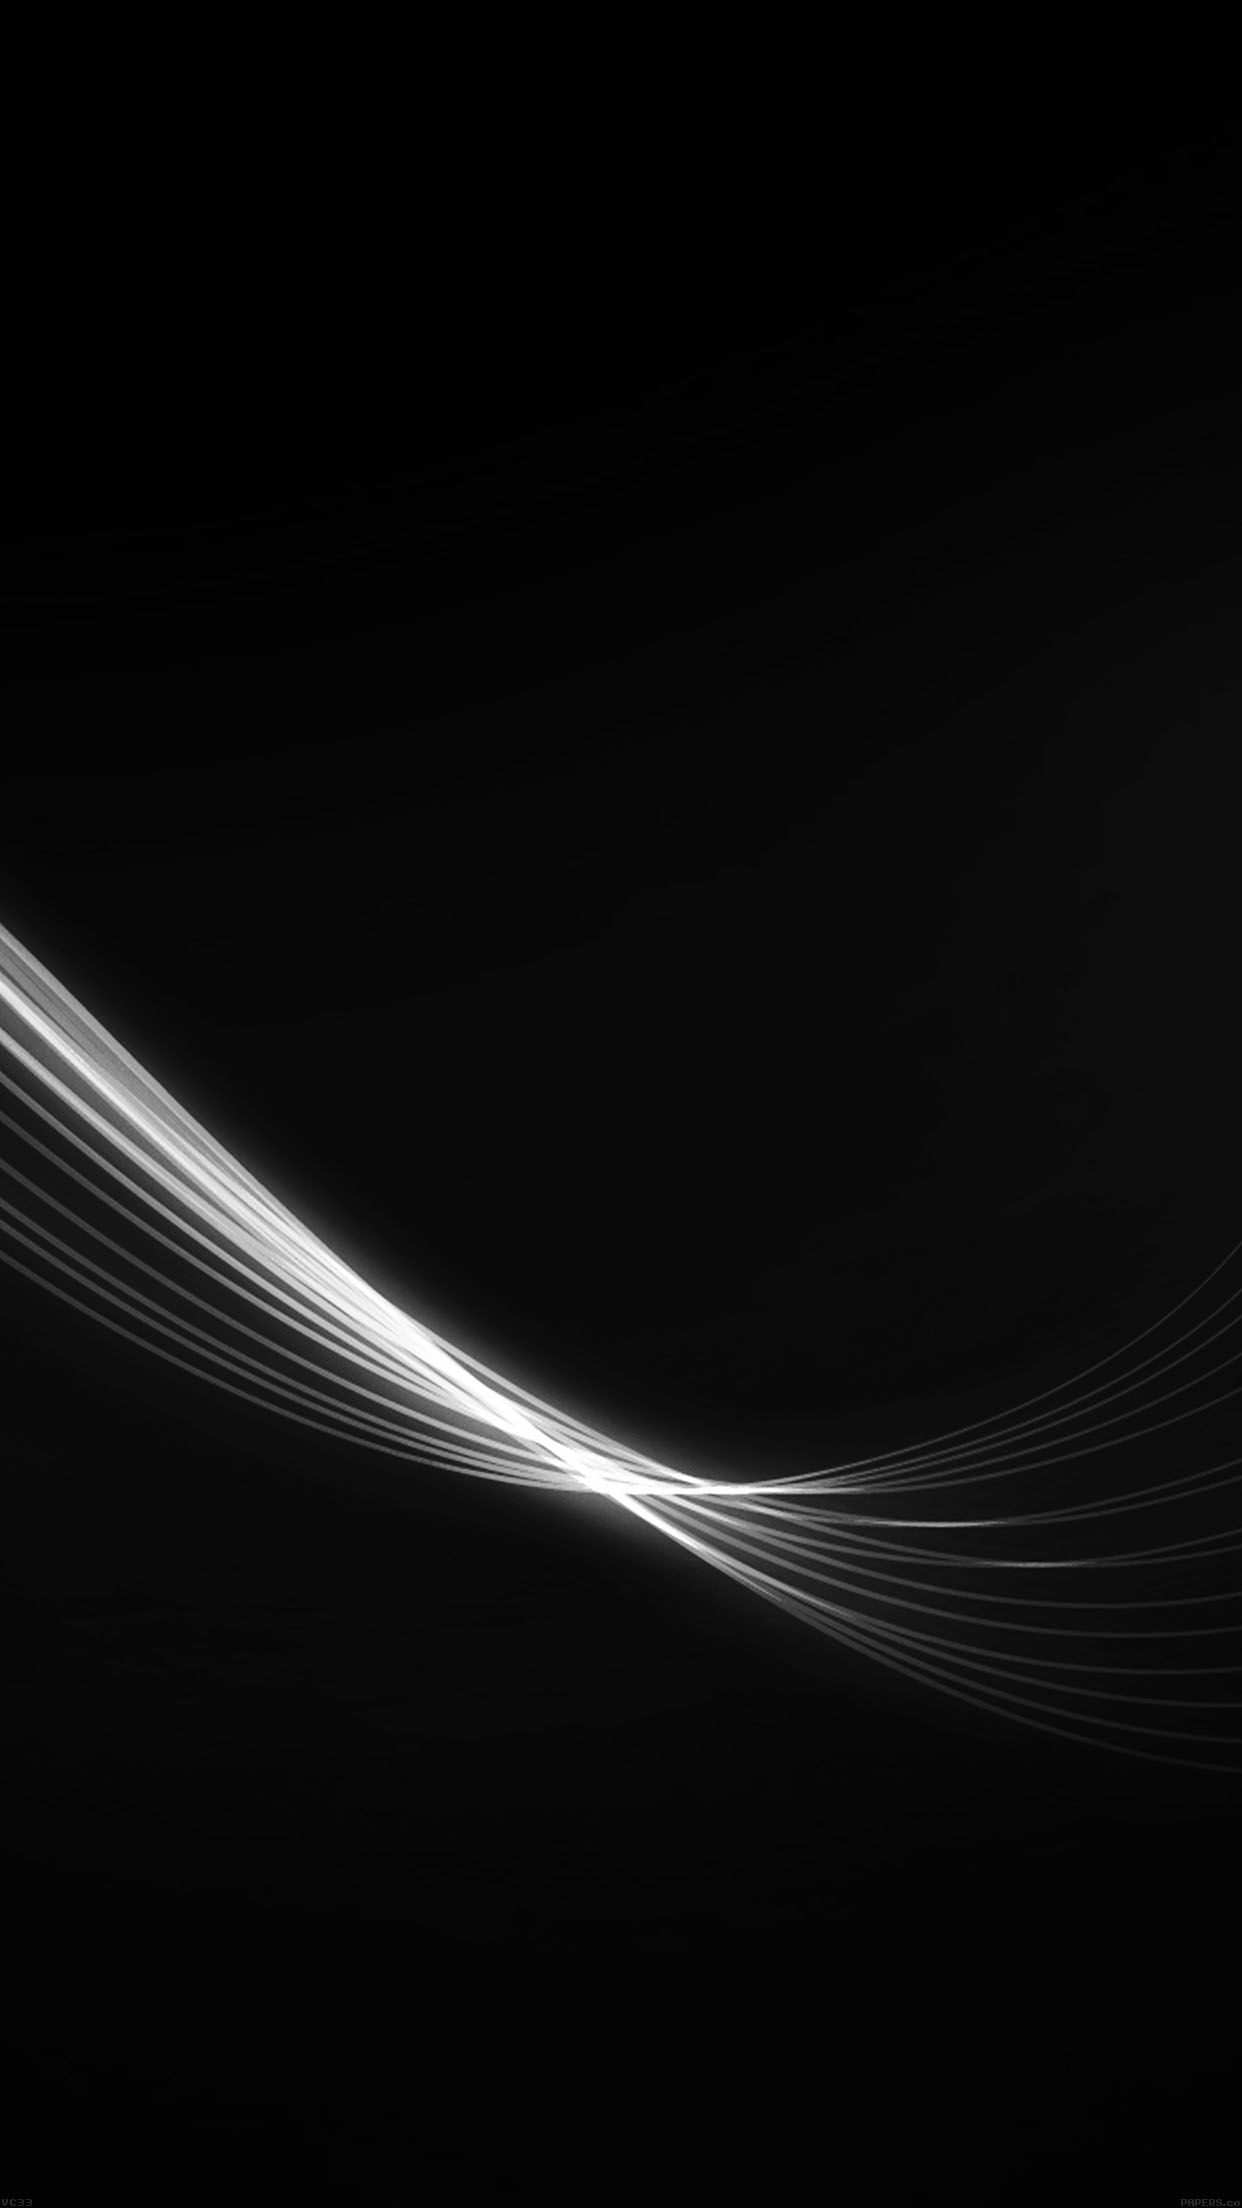 Feather Abstract Black Dark Pattern Android wallpaper HD wallpaper